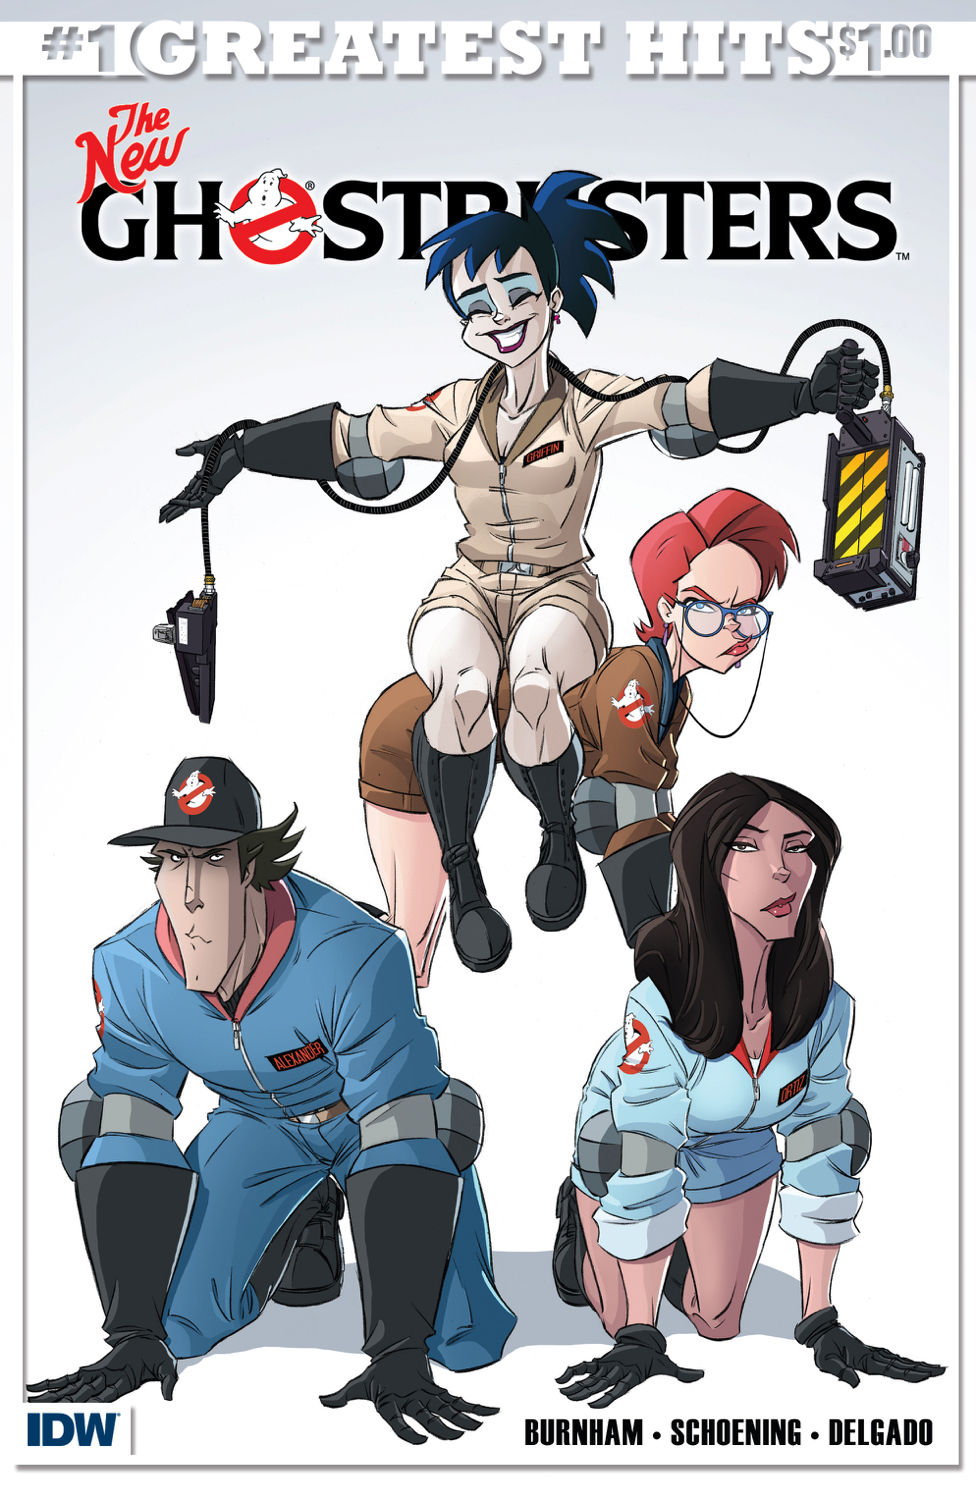 GHOSTBUSTERS NEW GHOSTBUSTERS #1 IDW GREATEST HITS ED